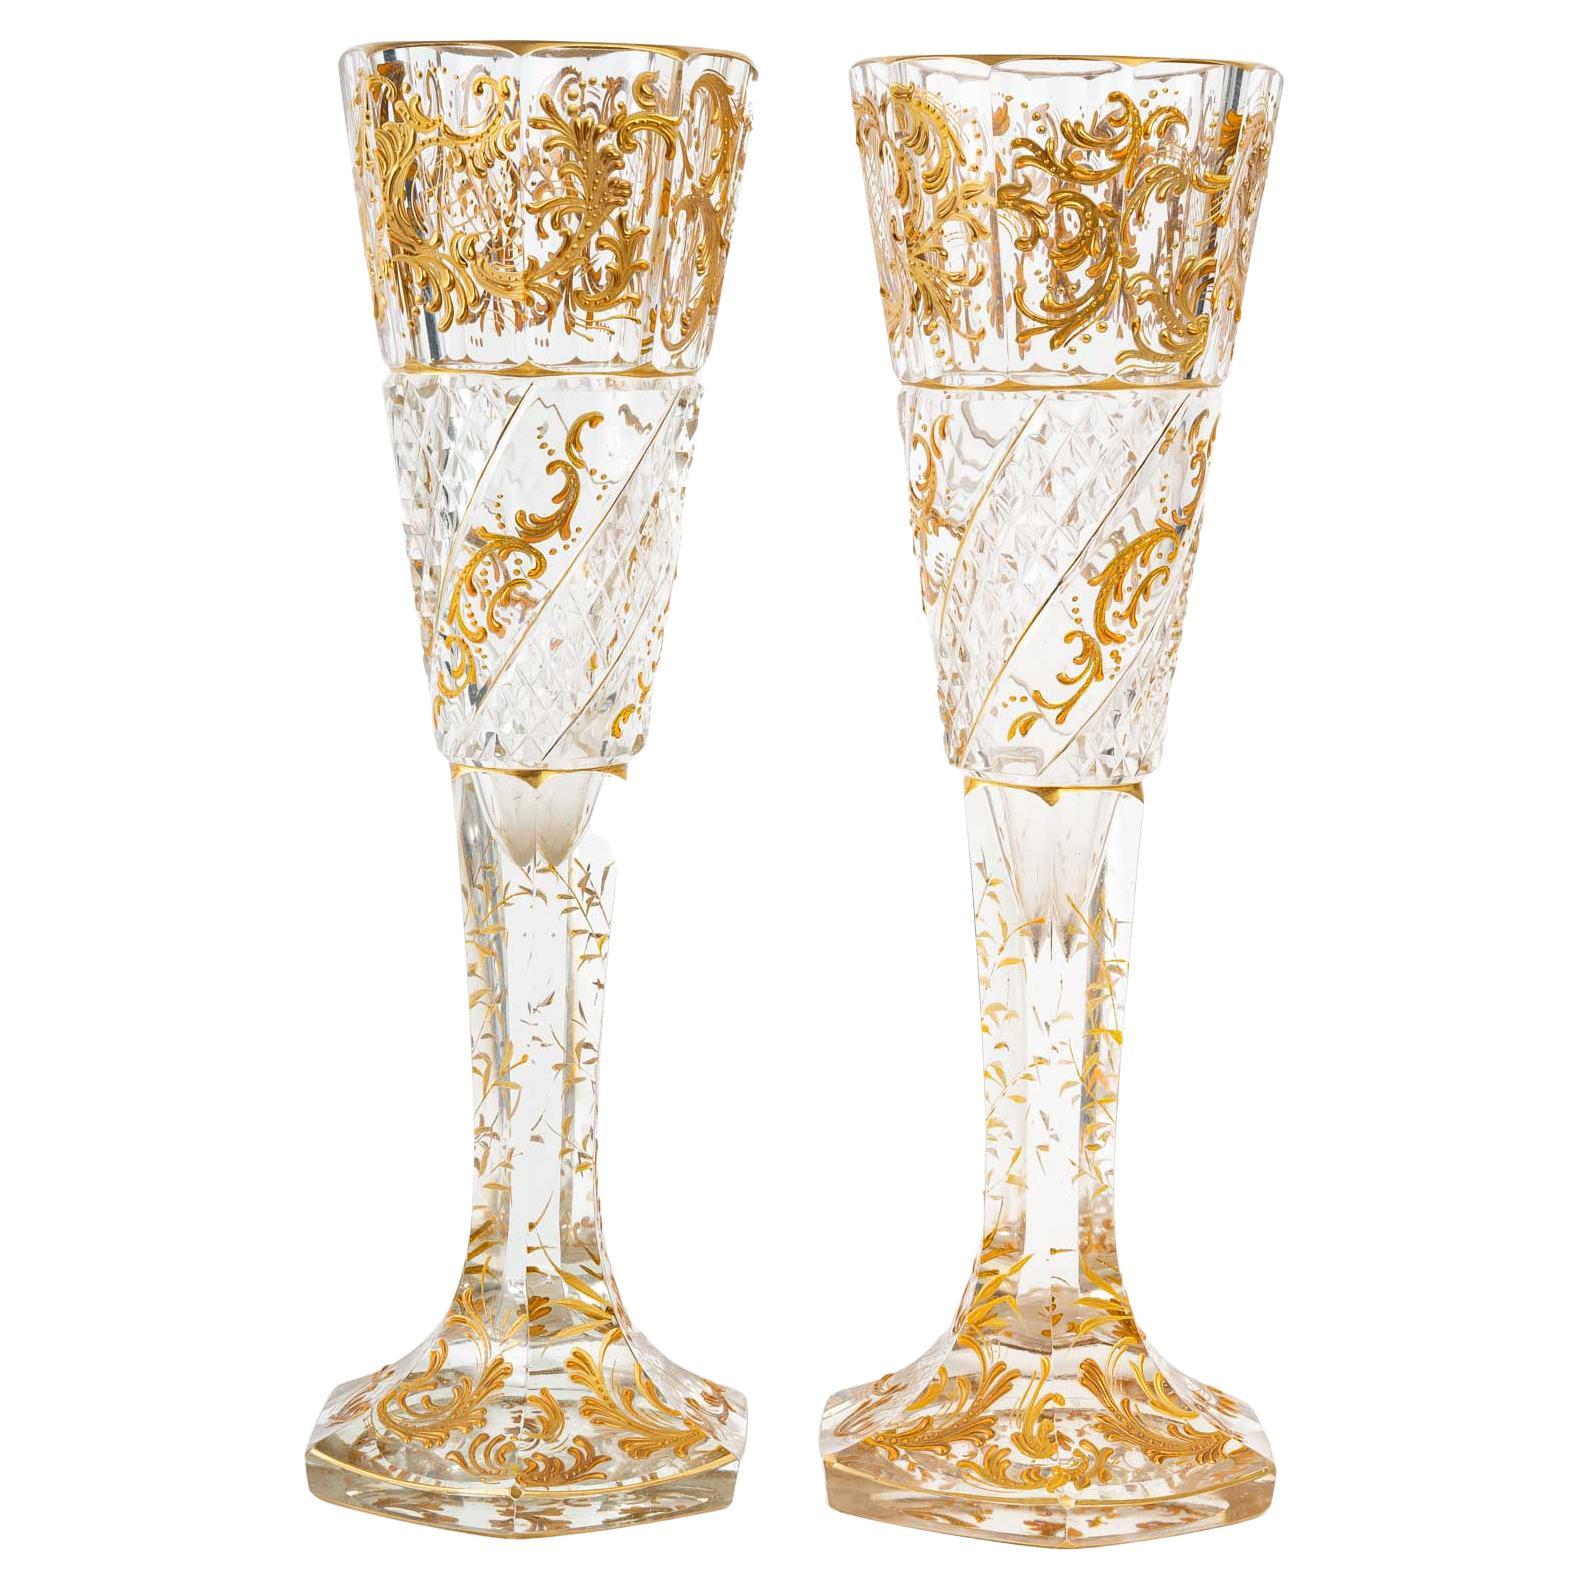 Pair of Baccarat Chased Crystal Vases